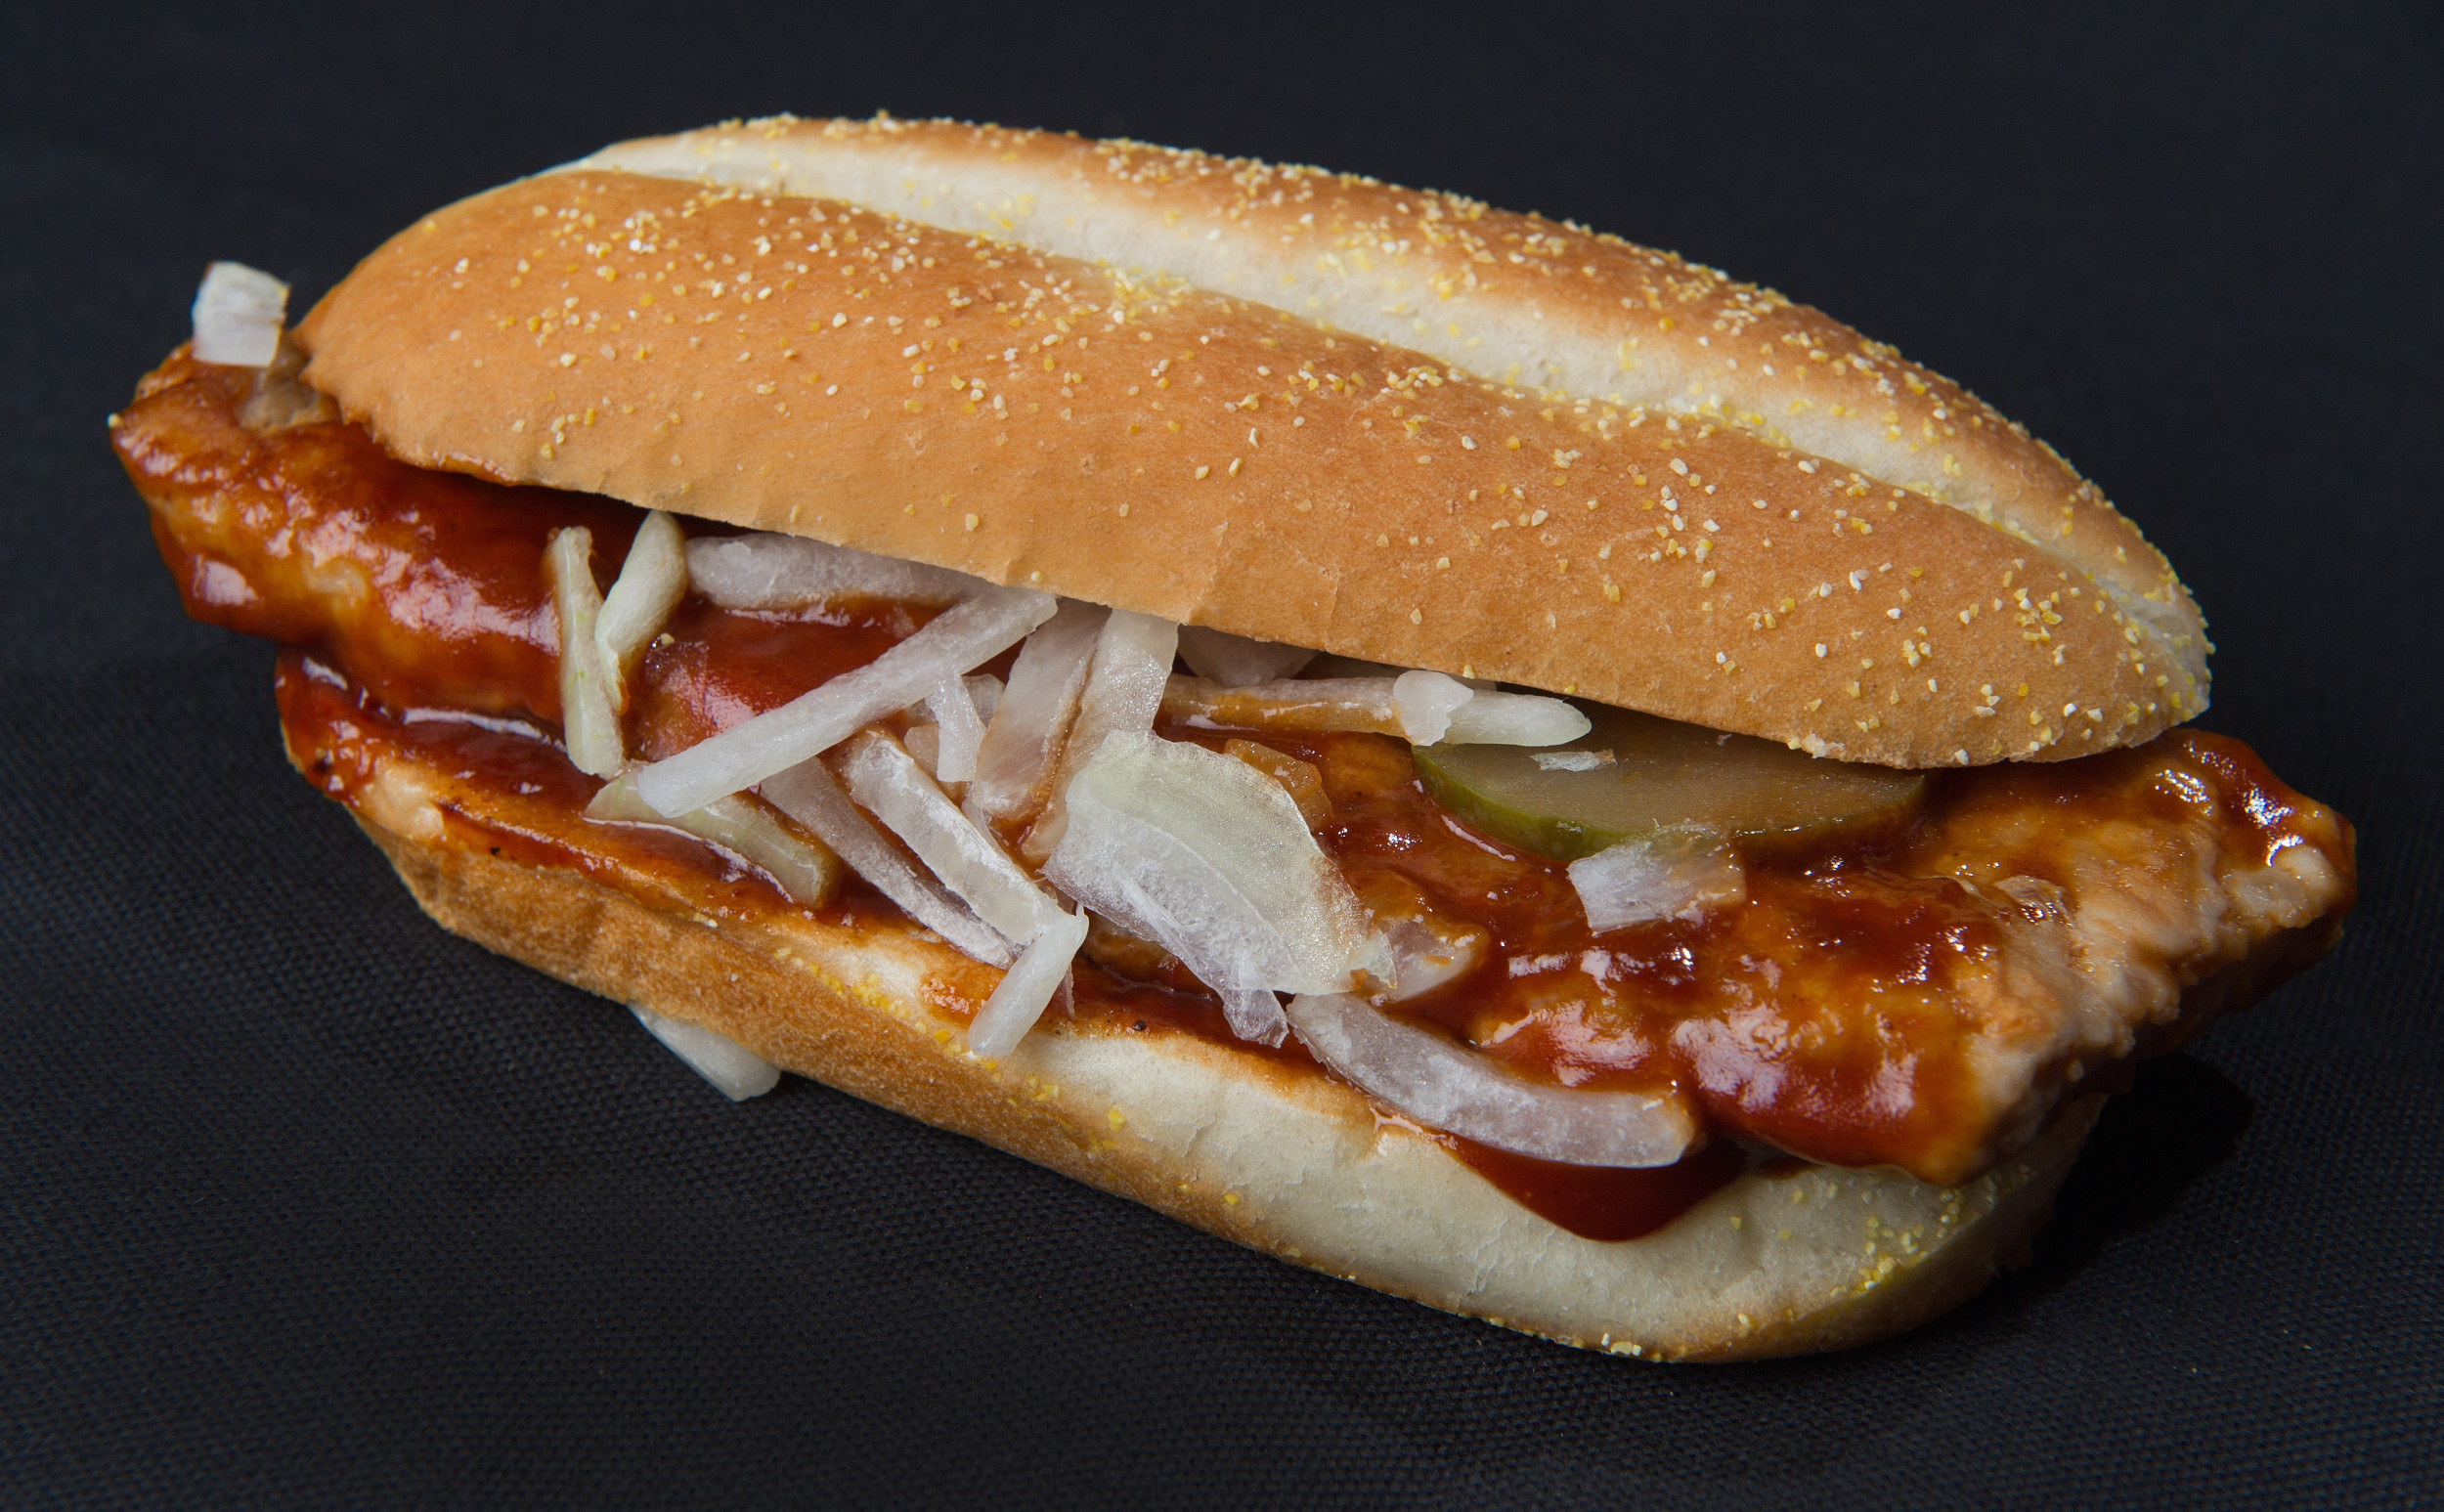 McRib 2022 Farewell Tour What Ingredients Make Up the Popular Sandwich?